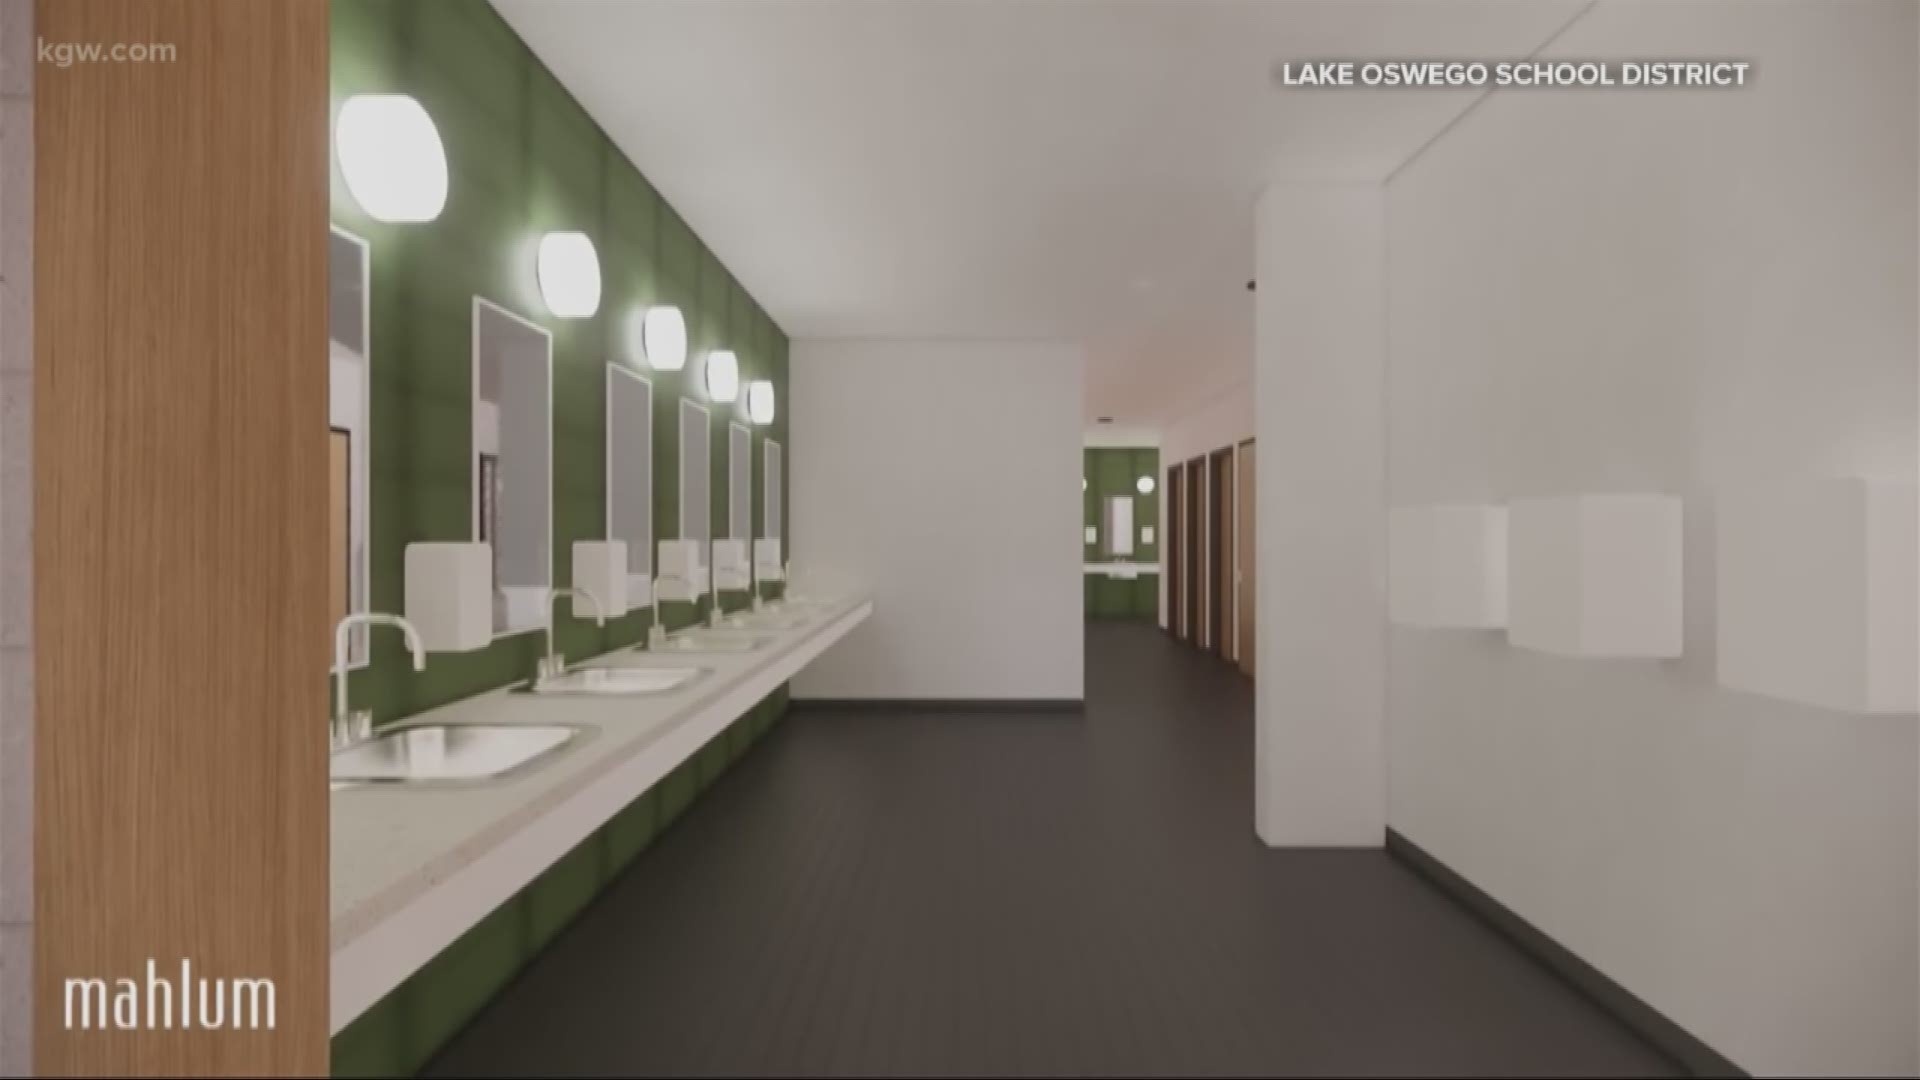 Lakeridge Junior High School is being rebuilt and the plan calls for gender-neutral, all-user bathroom stalls with communal sinks.